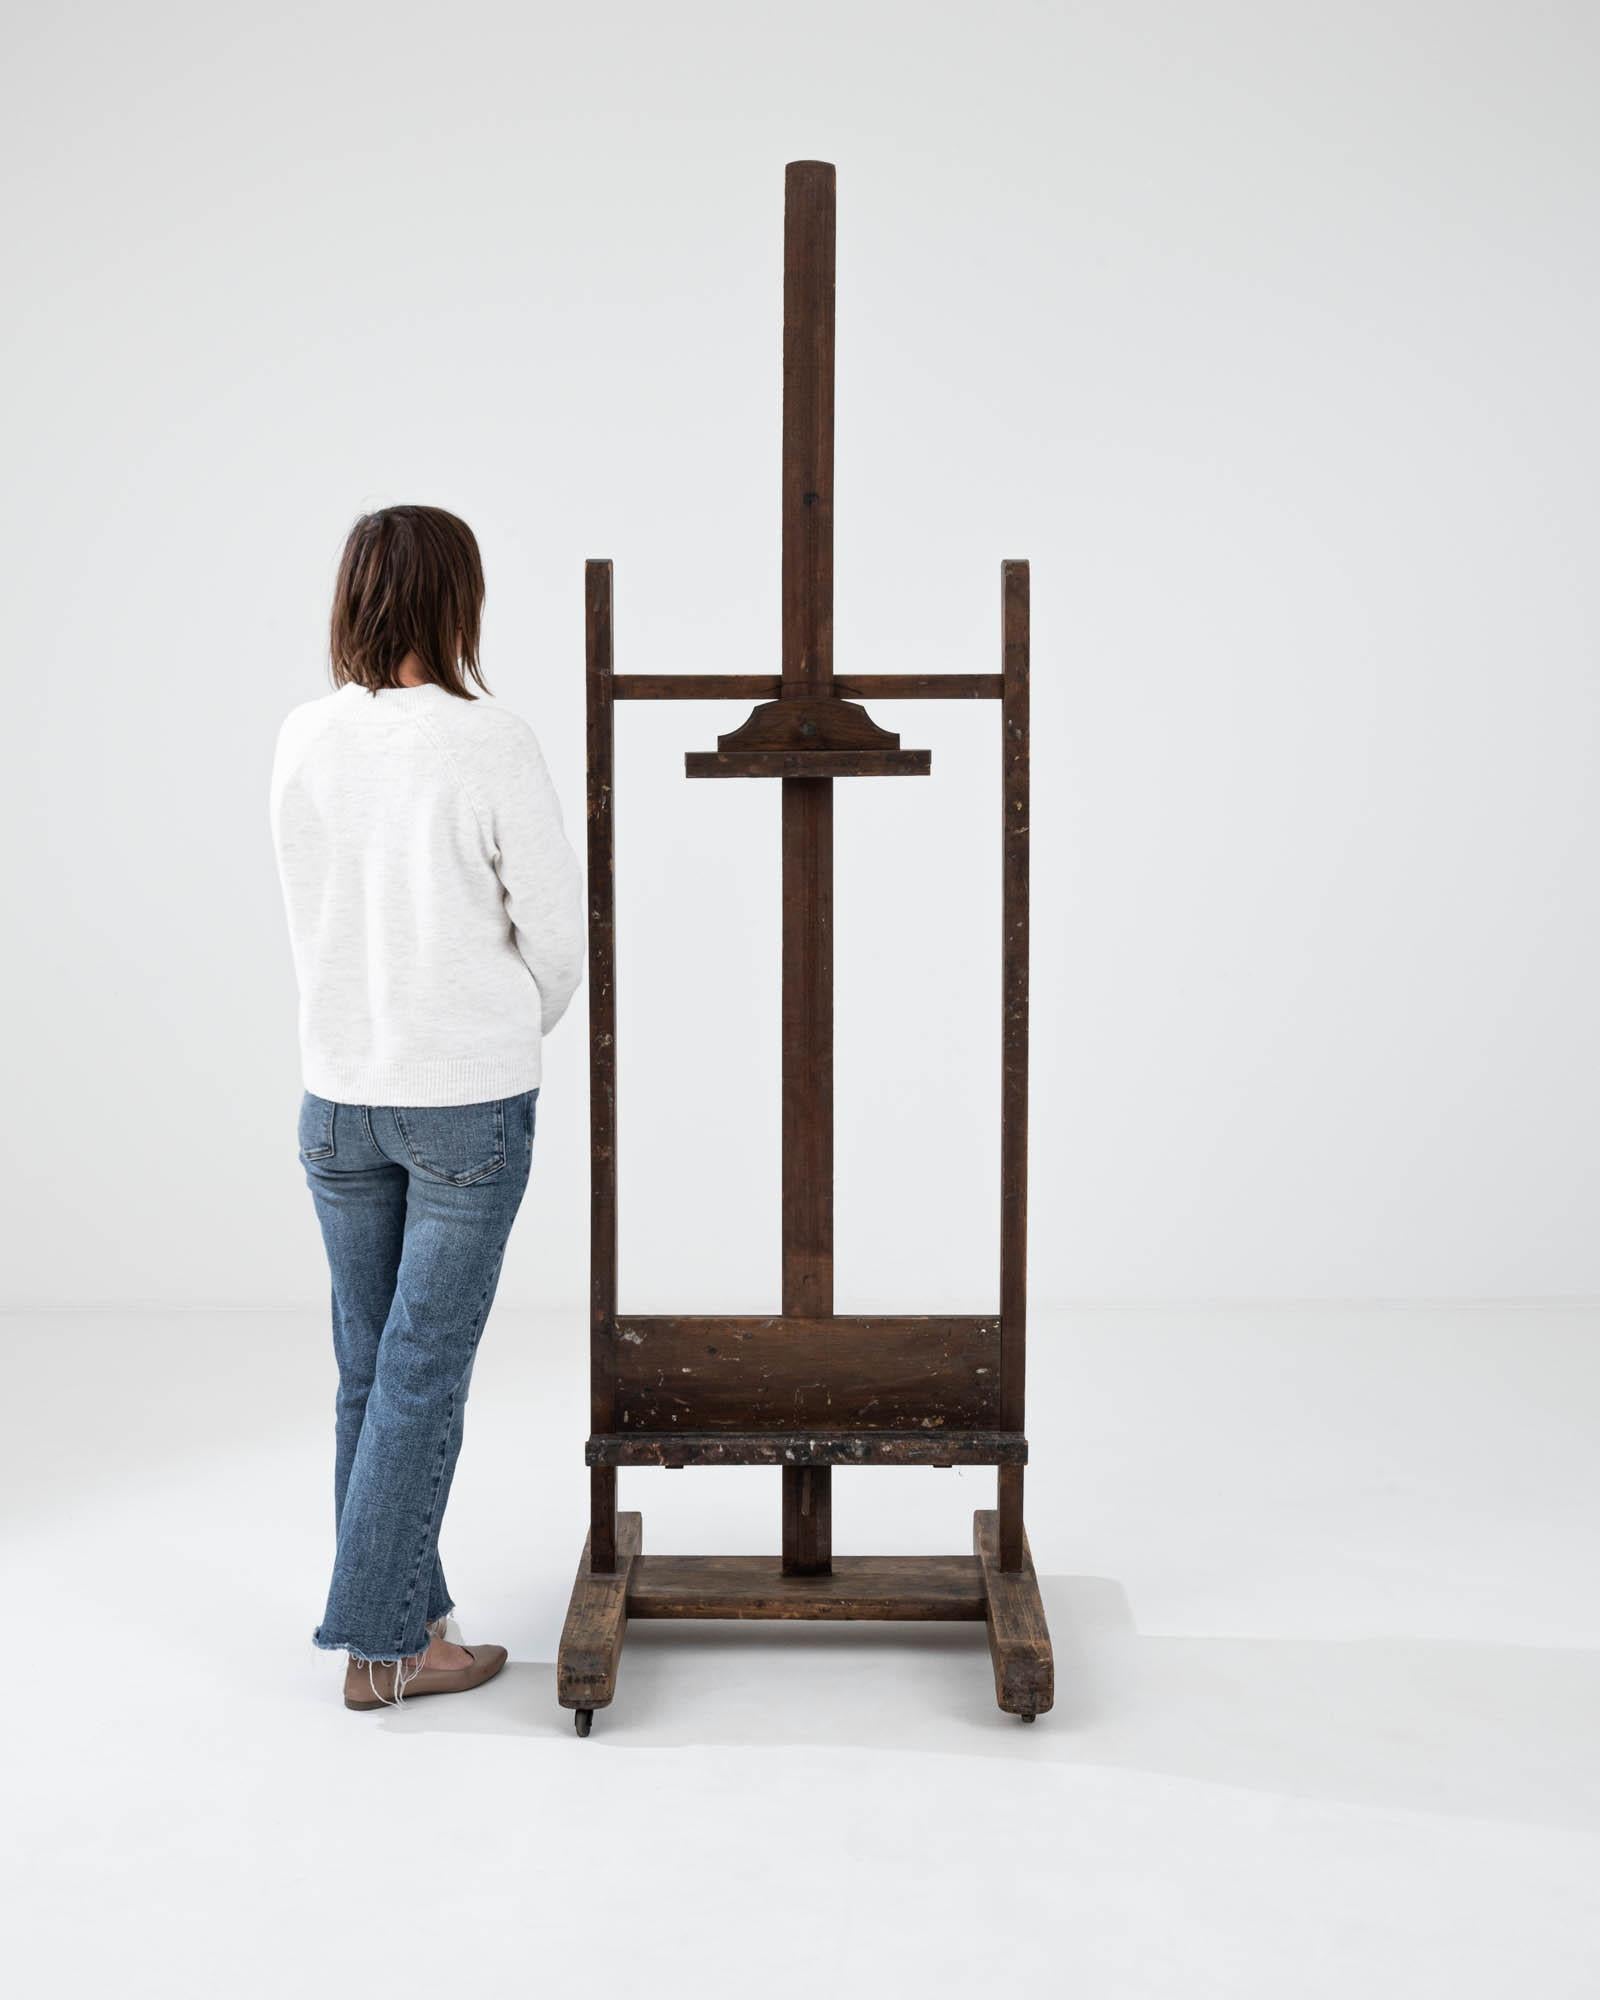 This wooden easel provides a bohemian accent or a practical accessory with a nostalgic touch. A wooden easel made in France circa 1900, standing upright with a composed posture, this adjustable easel is ready for its next job. Warm, glowing mood